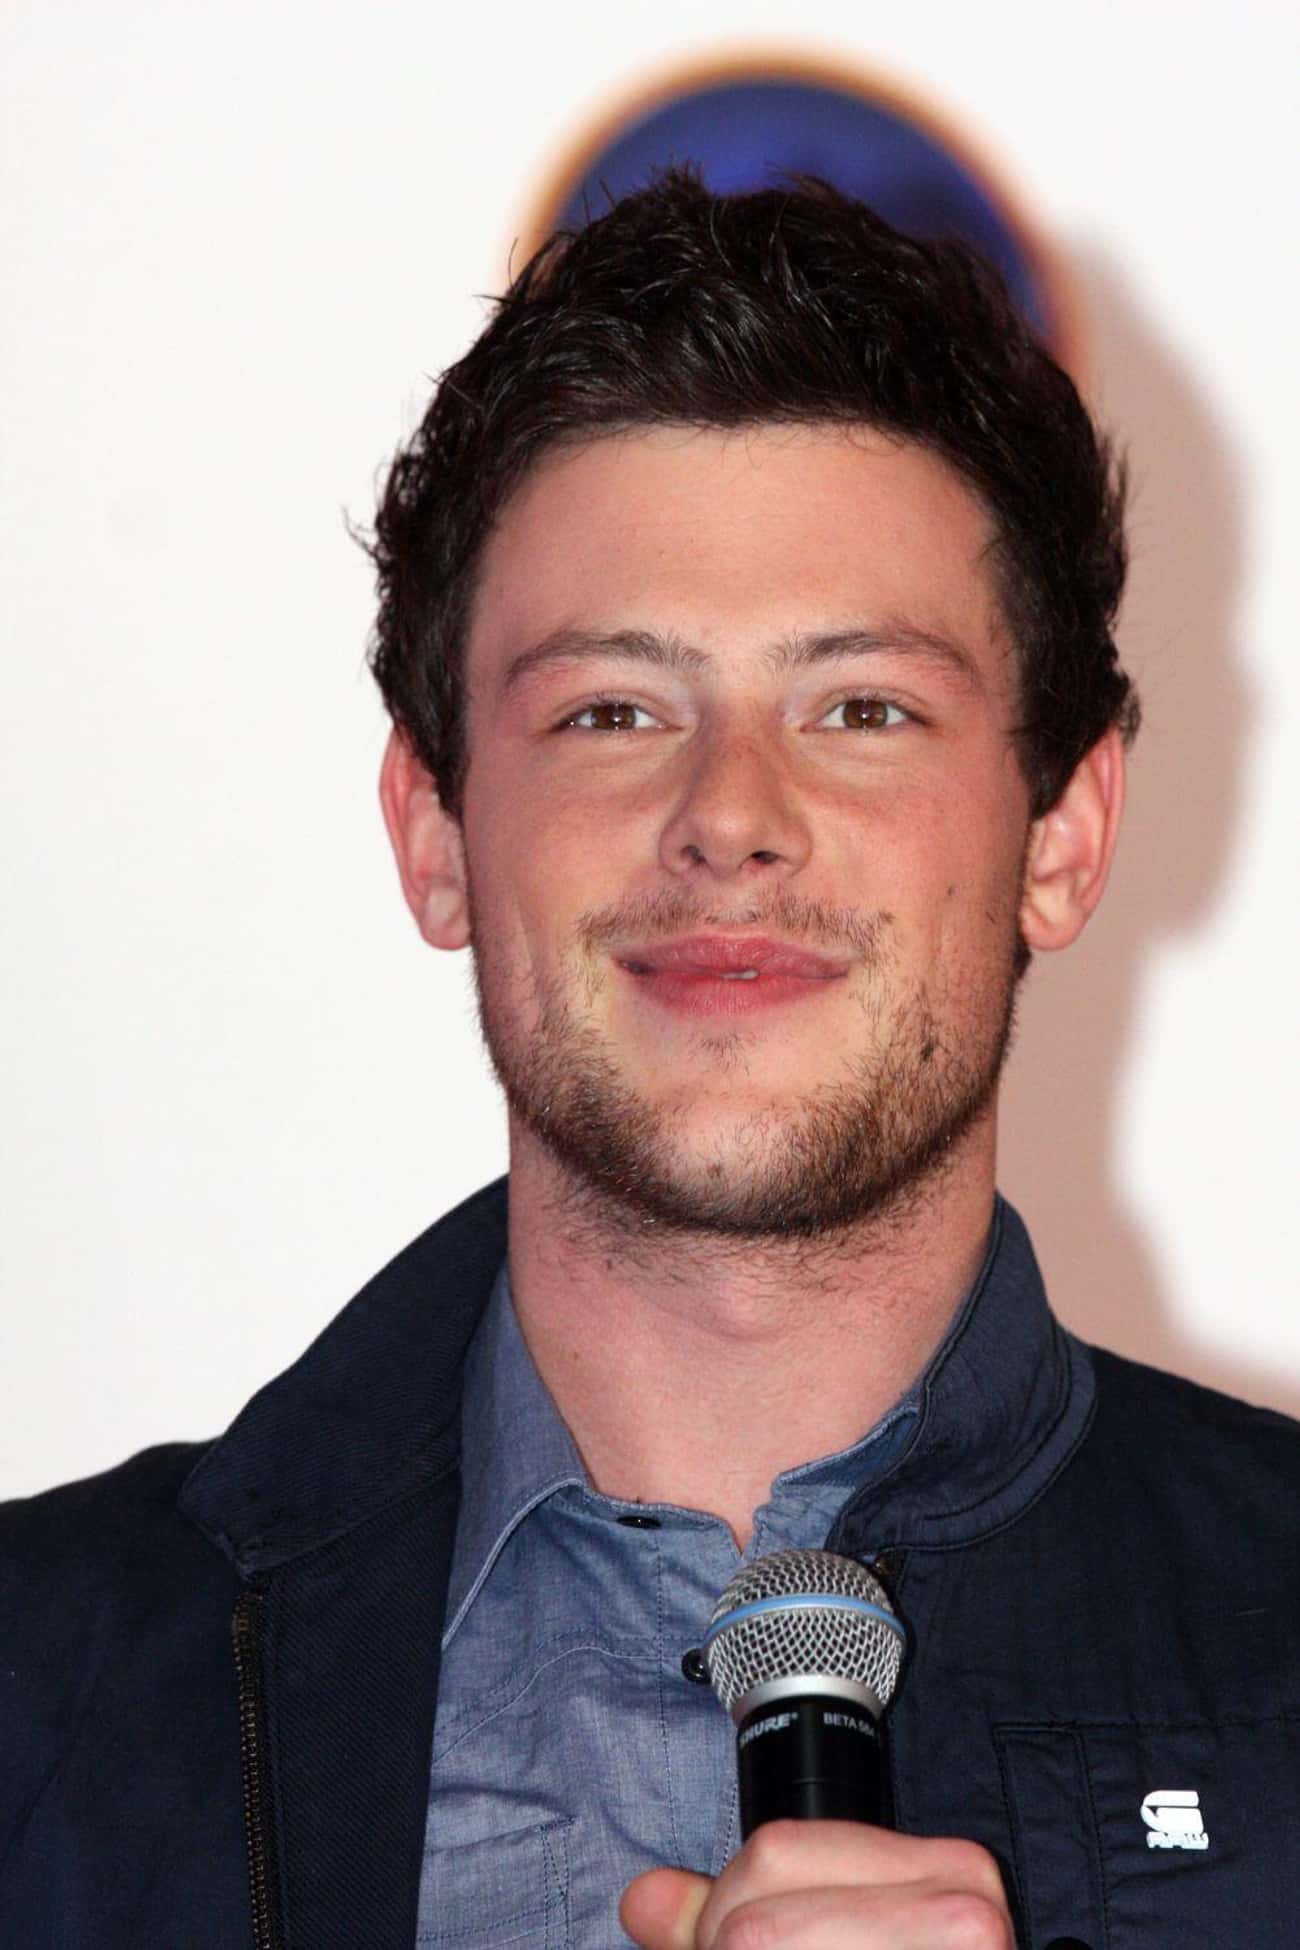 'Glee' Star Cory Monteith Overdosed At Age 31 In A Vancouver Hotel